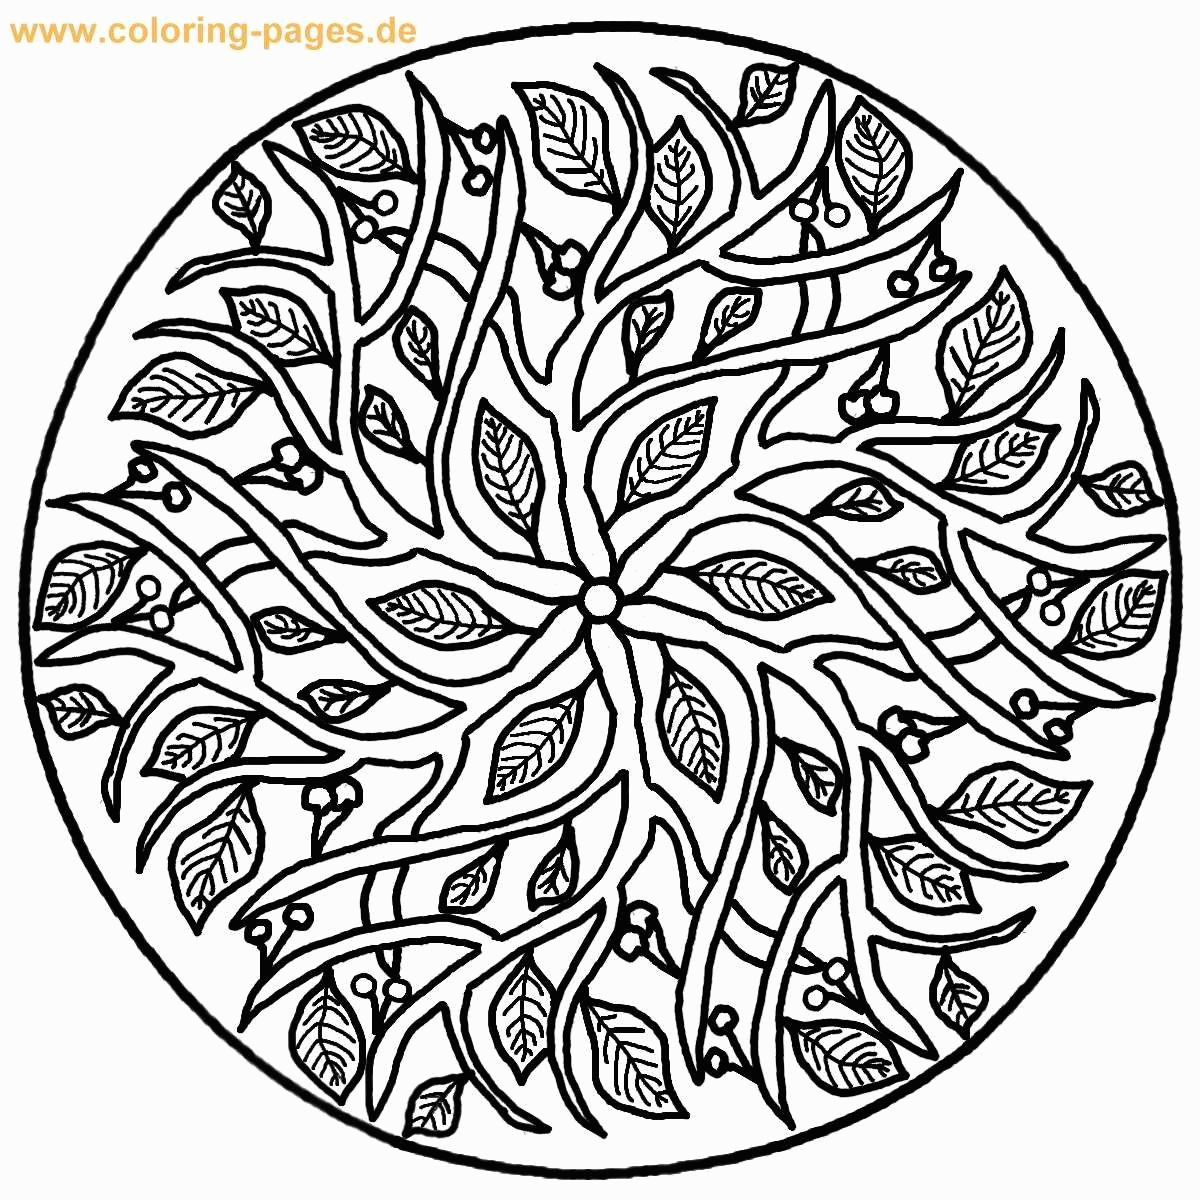 difficult coloring pages for adults - High Quality Coloring Pages